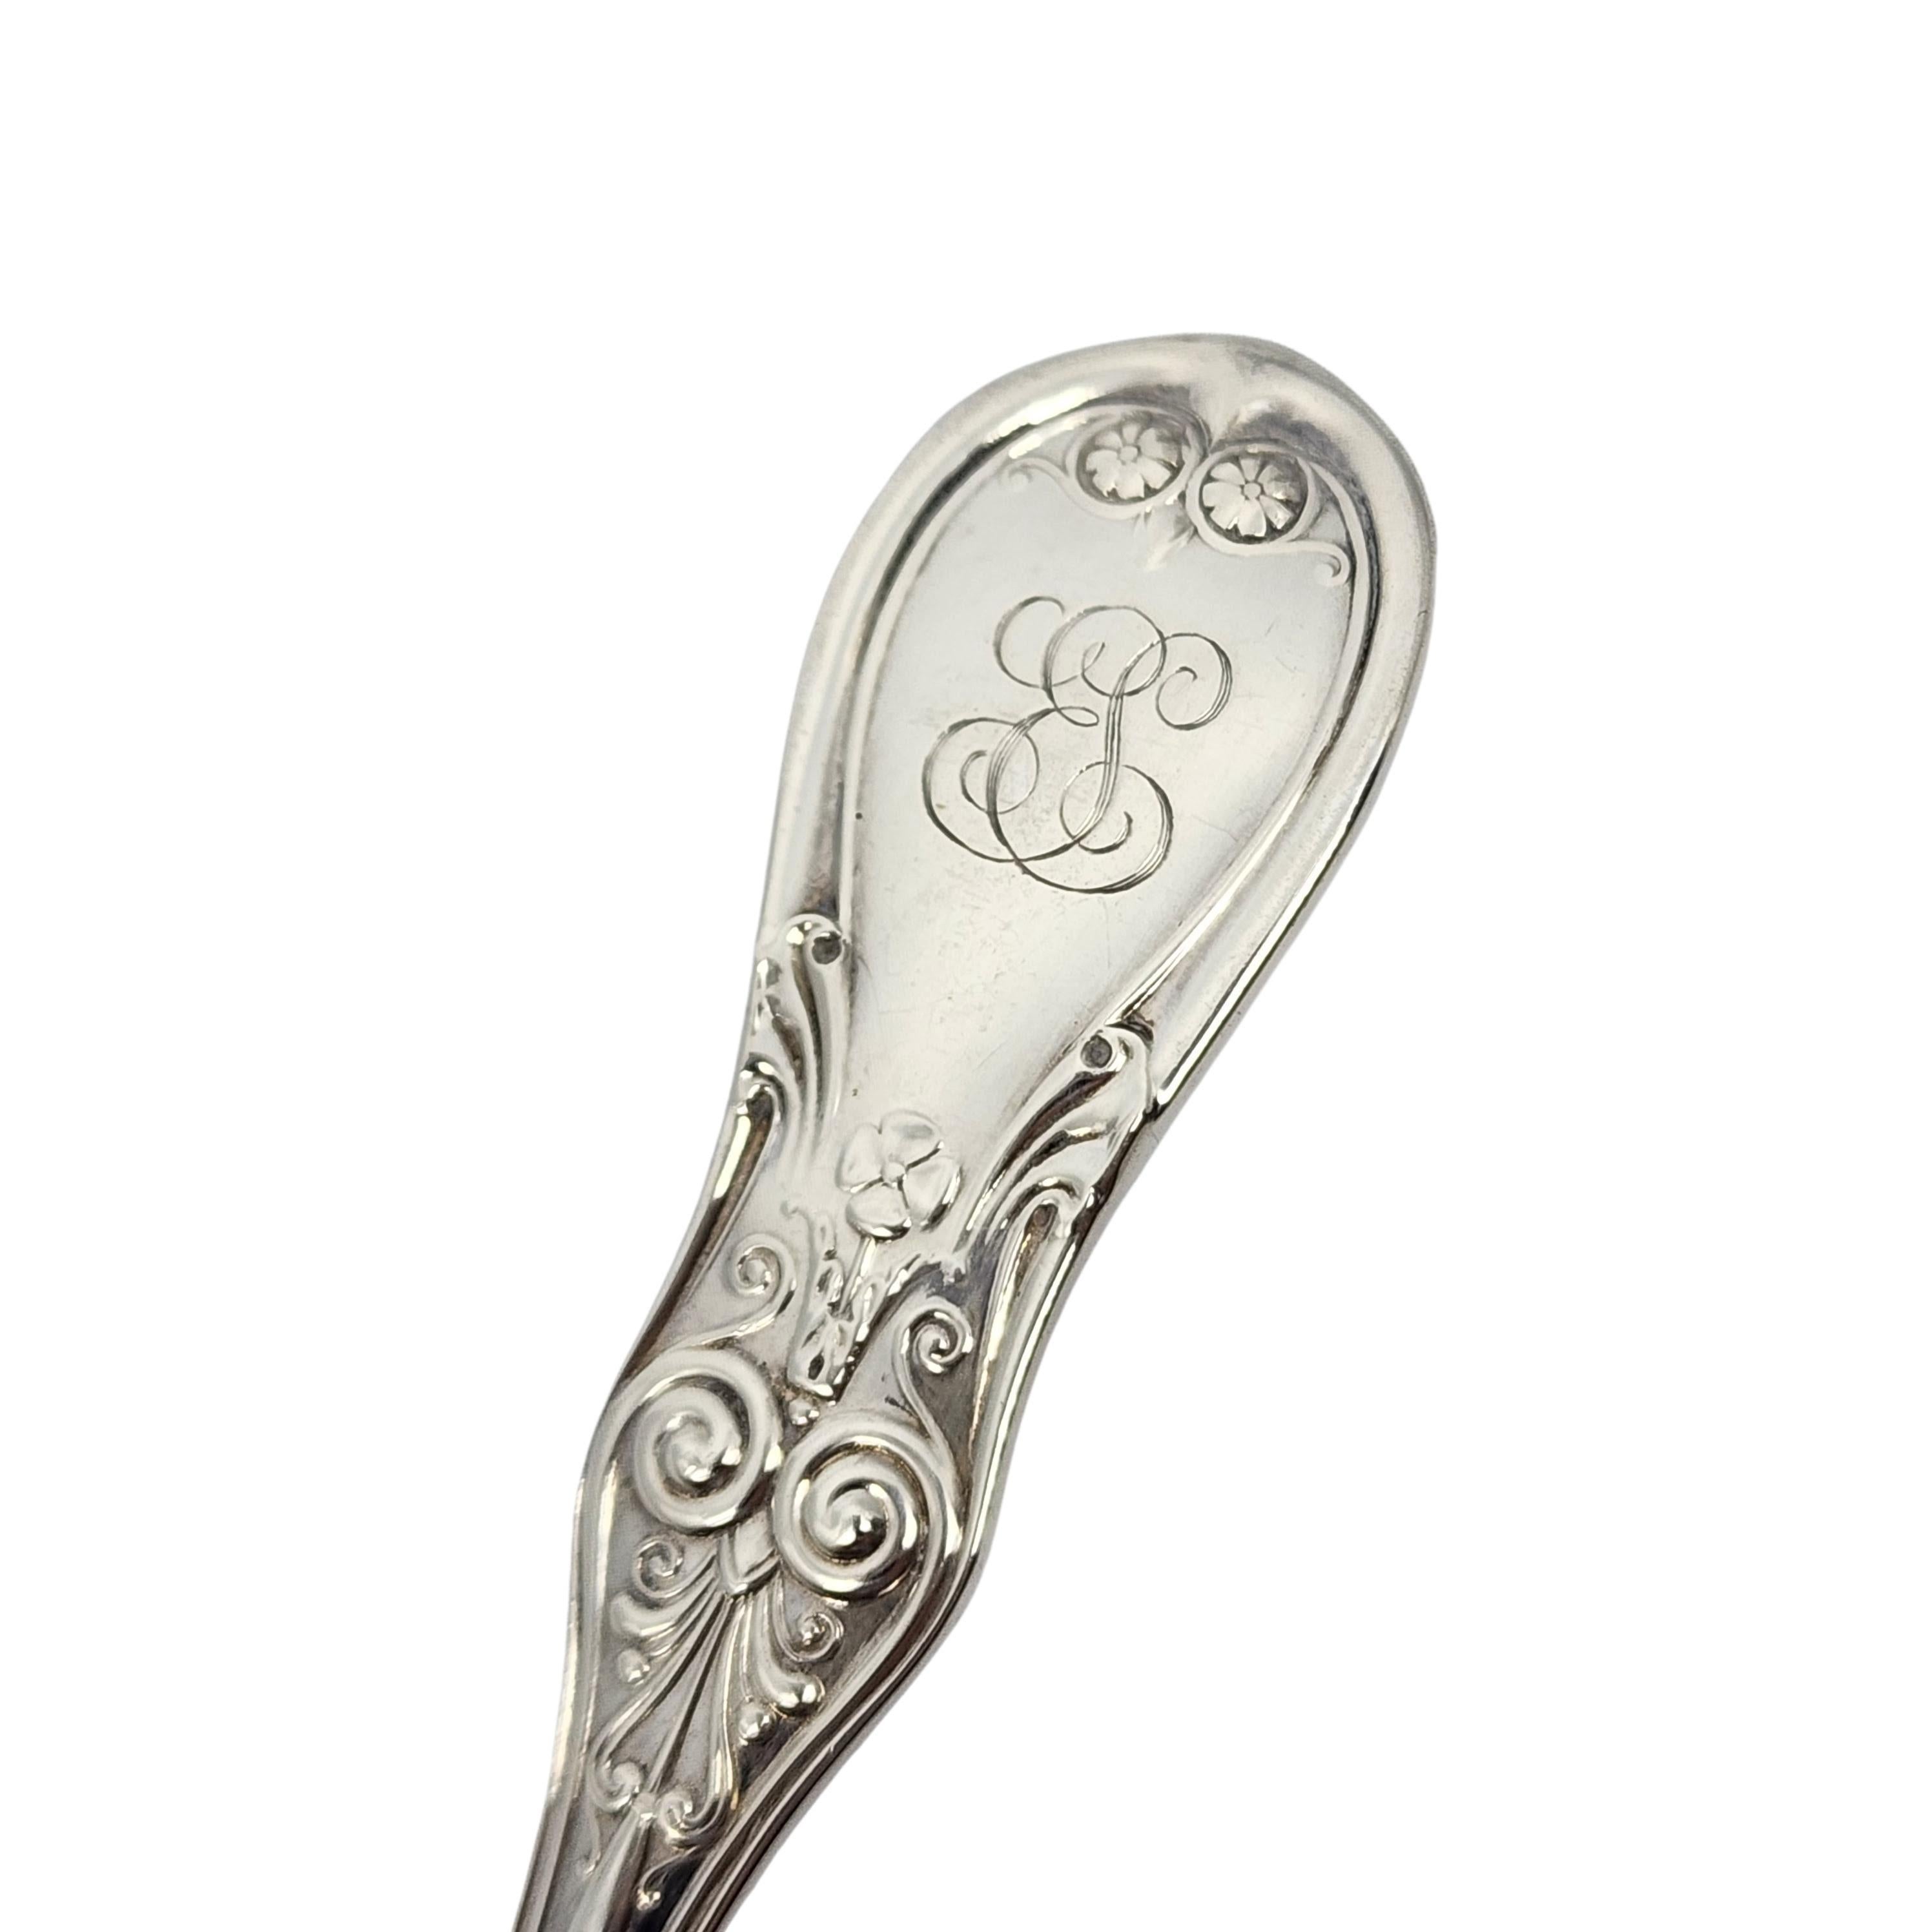 Tiffany & Co Saratoga/Cook/Kings Sterling Silver Master Butter Knife mono #15596 For Sale 4